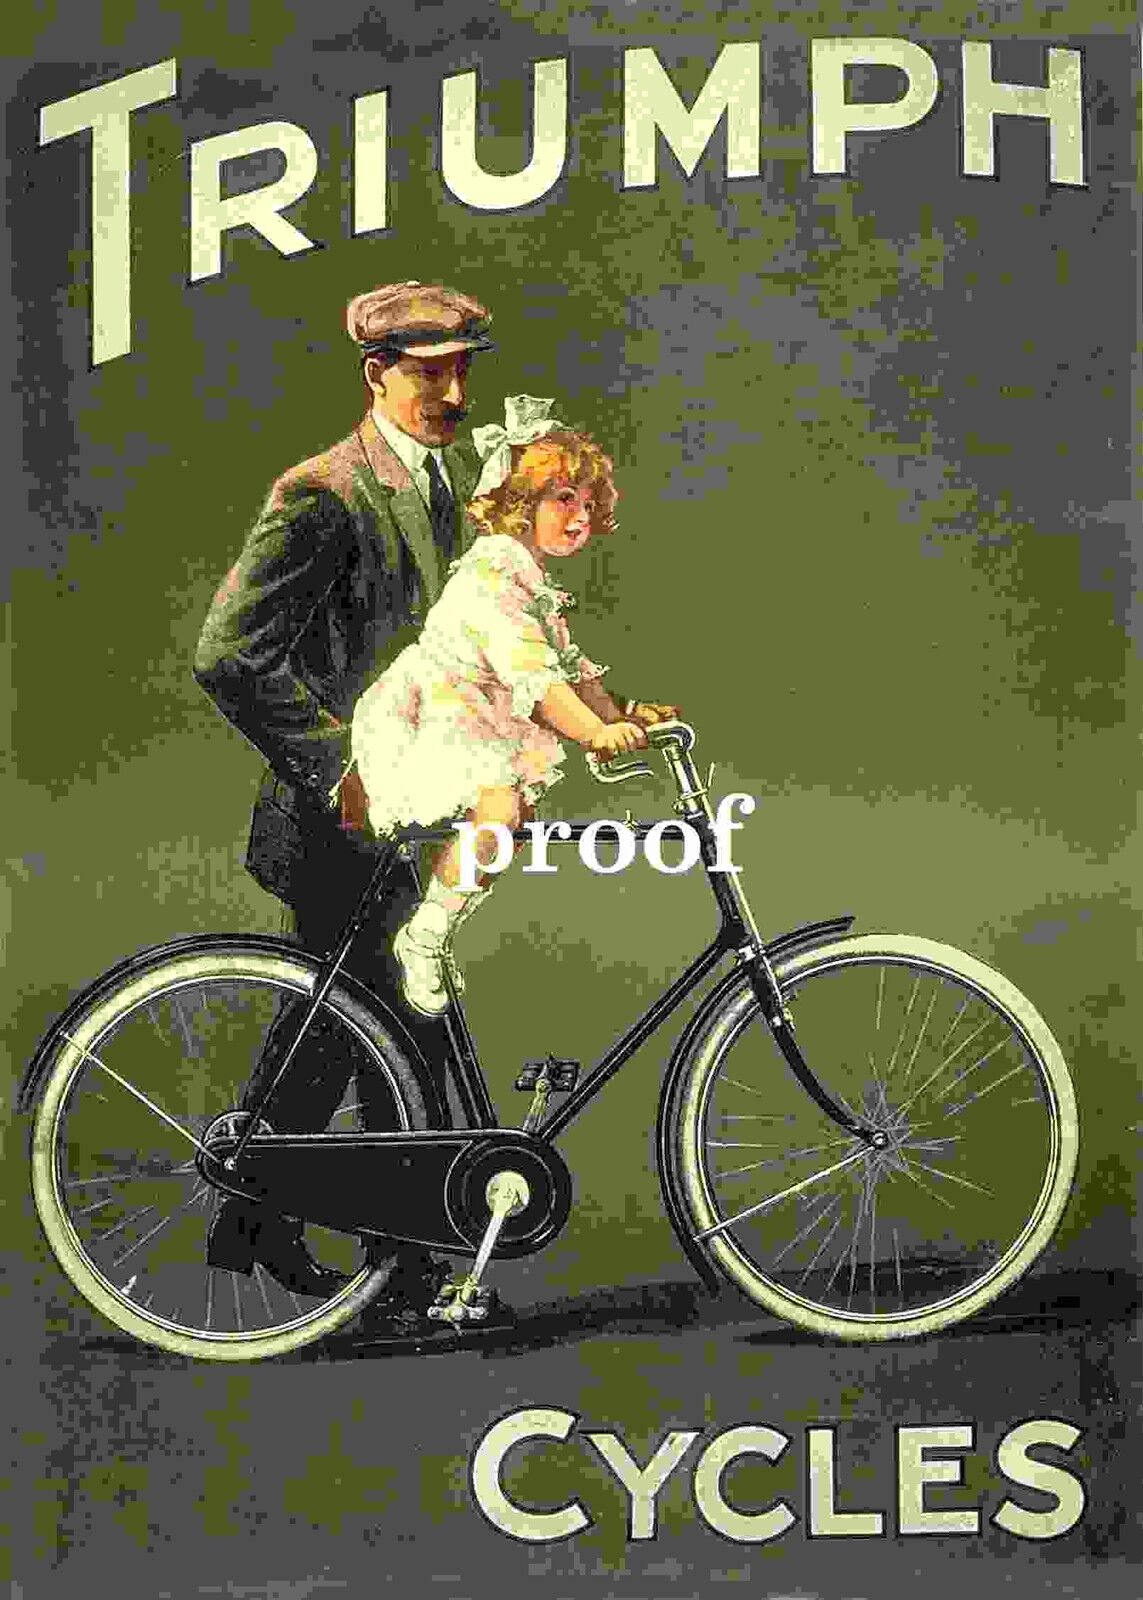 Triumph Bicycle Vintage Dad w/Young girl art print  1920 England USA